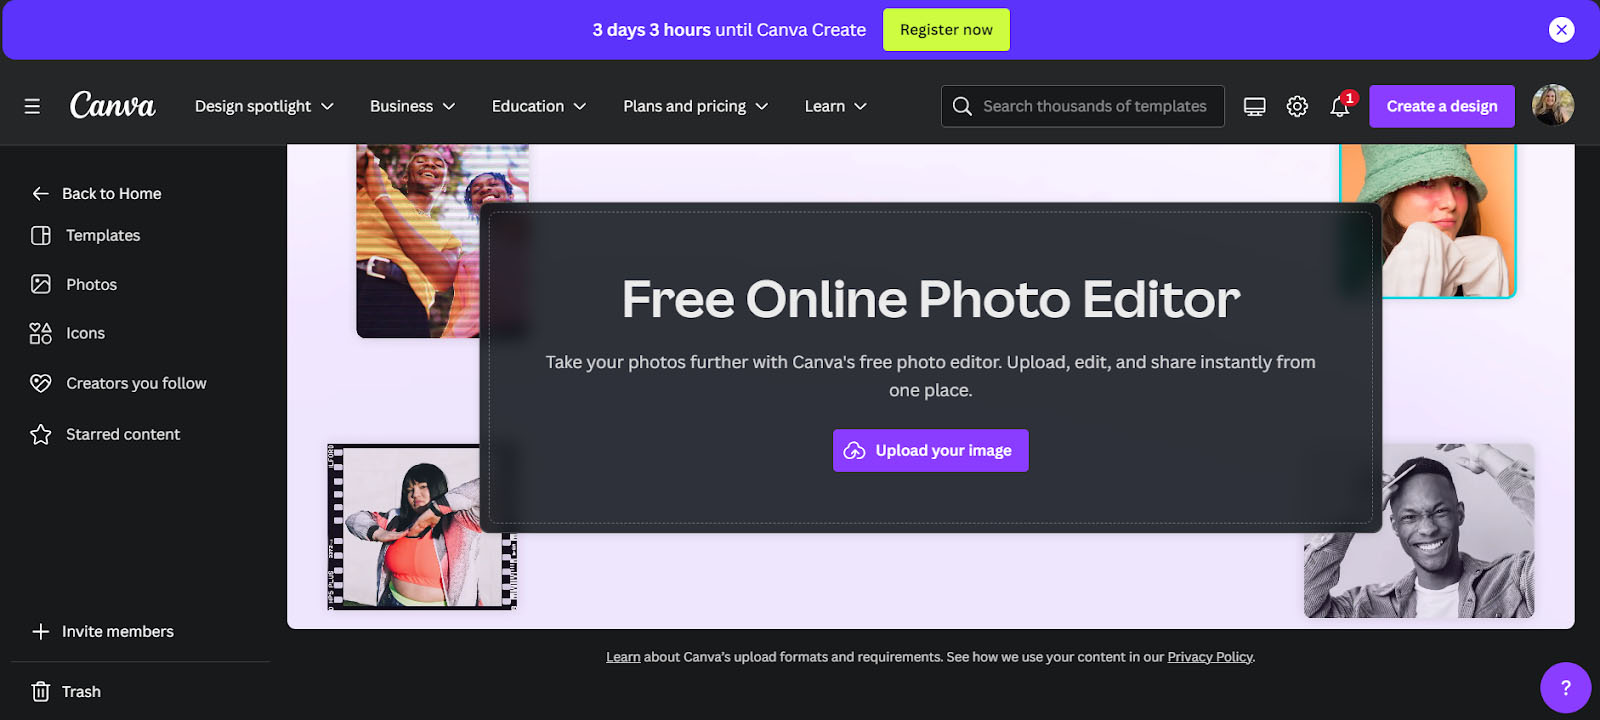 Canva's free online photo editor landing page.